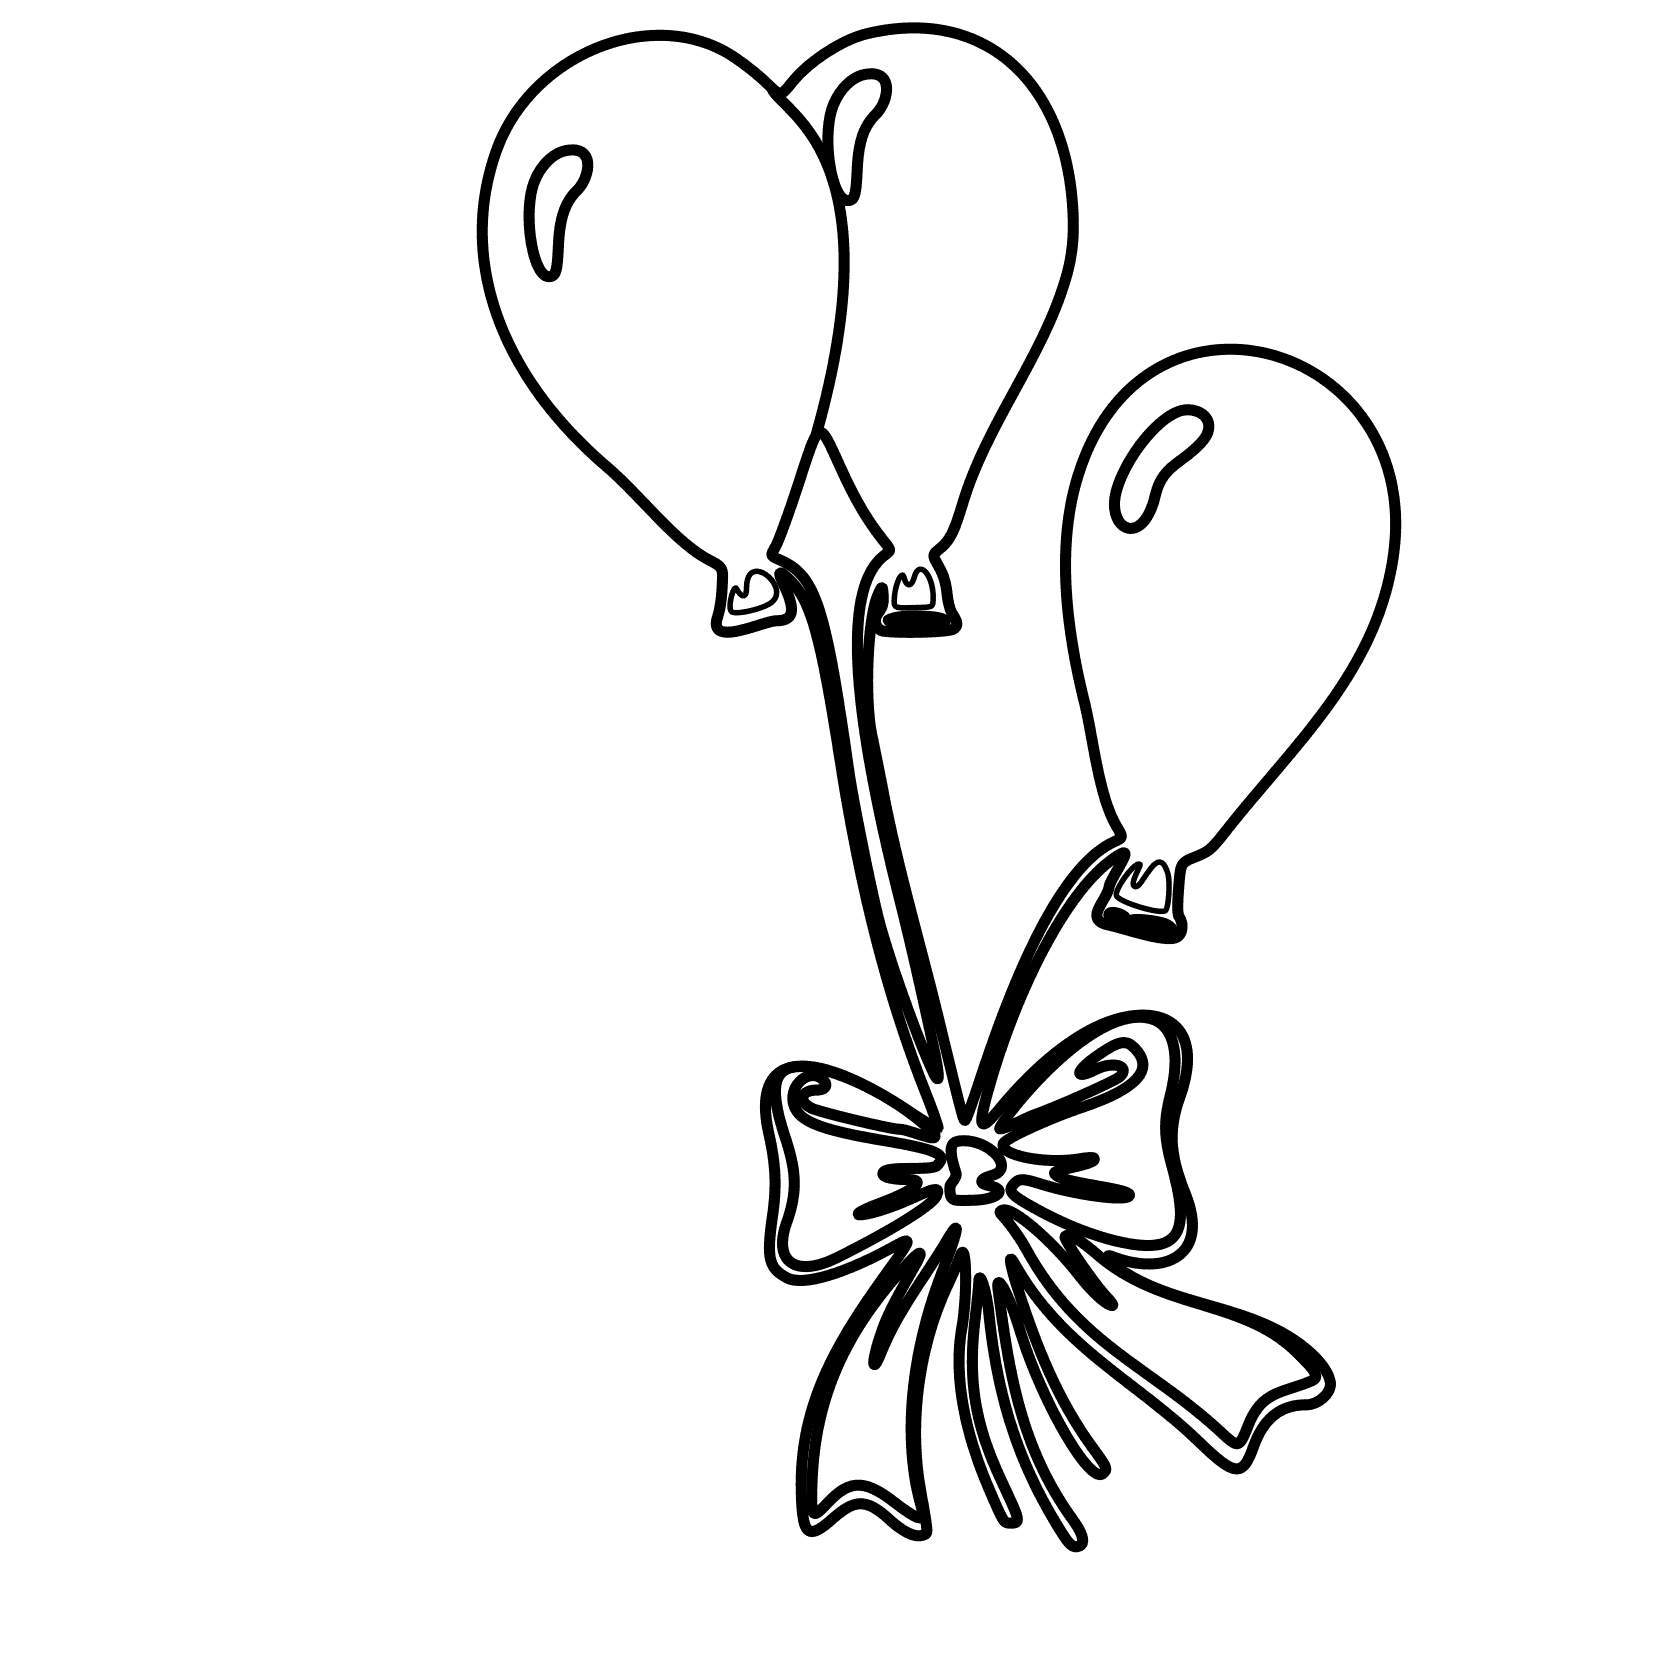 FREE COLOURING SHEETS BALLOONS - ClipArt Best